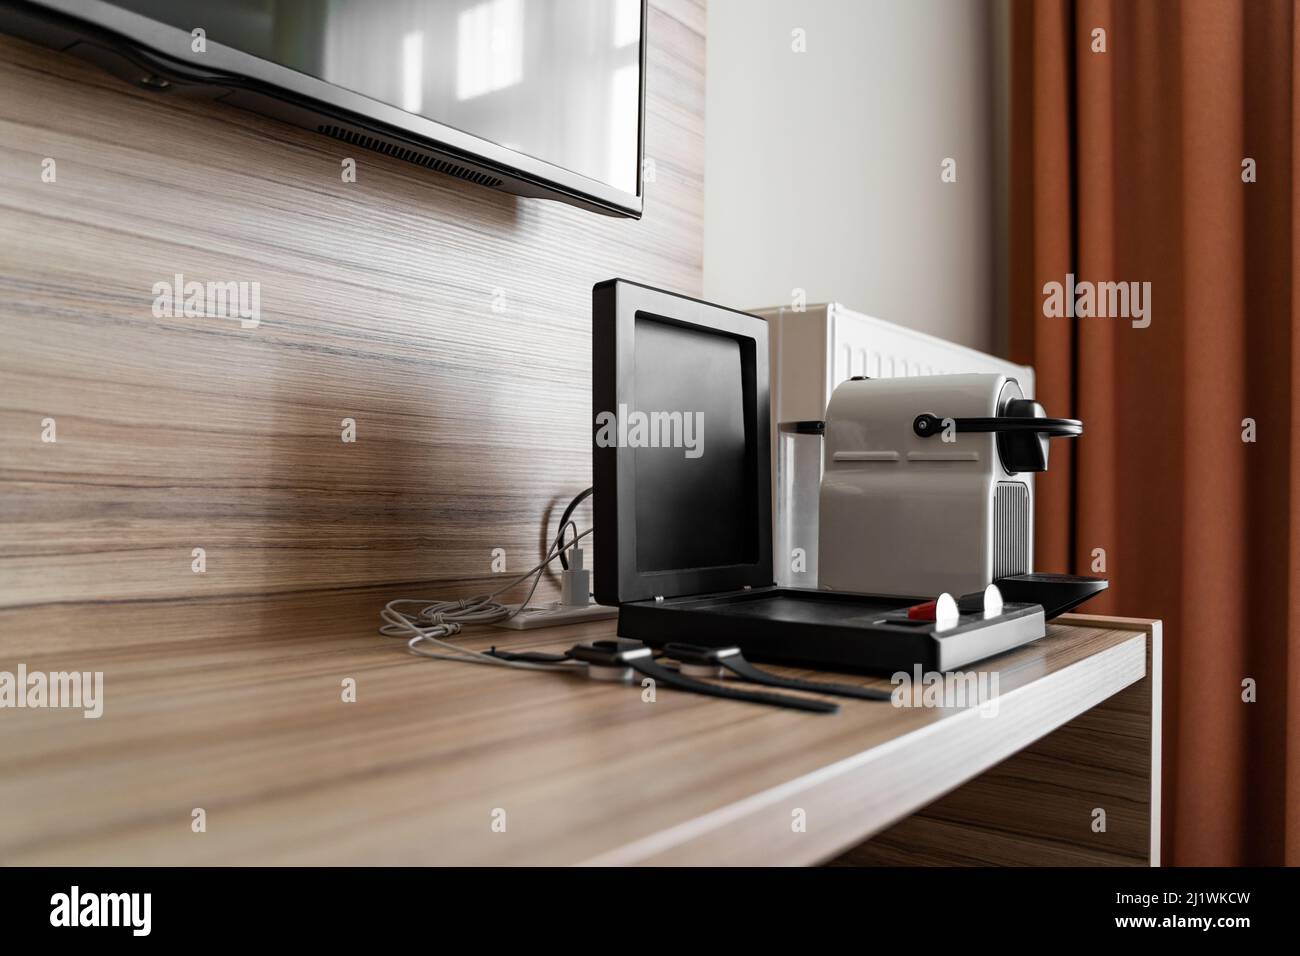 Two black apple watch on charge, coffee machine with capsules on wooden table Stock Photo